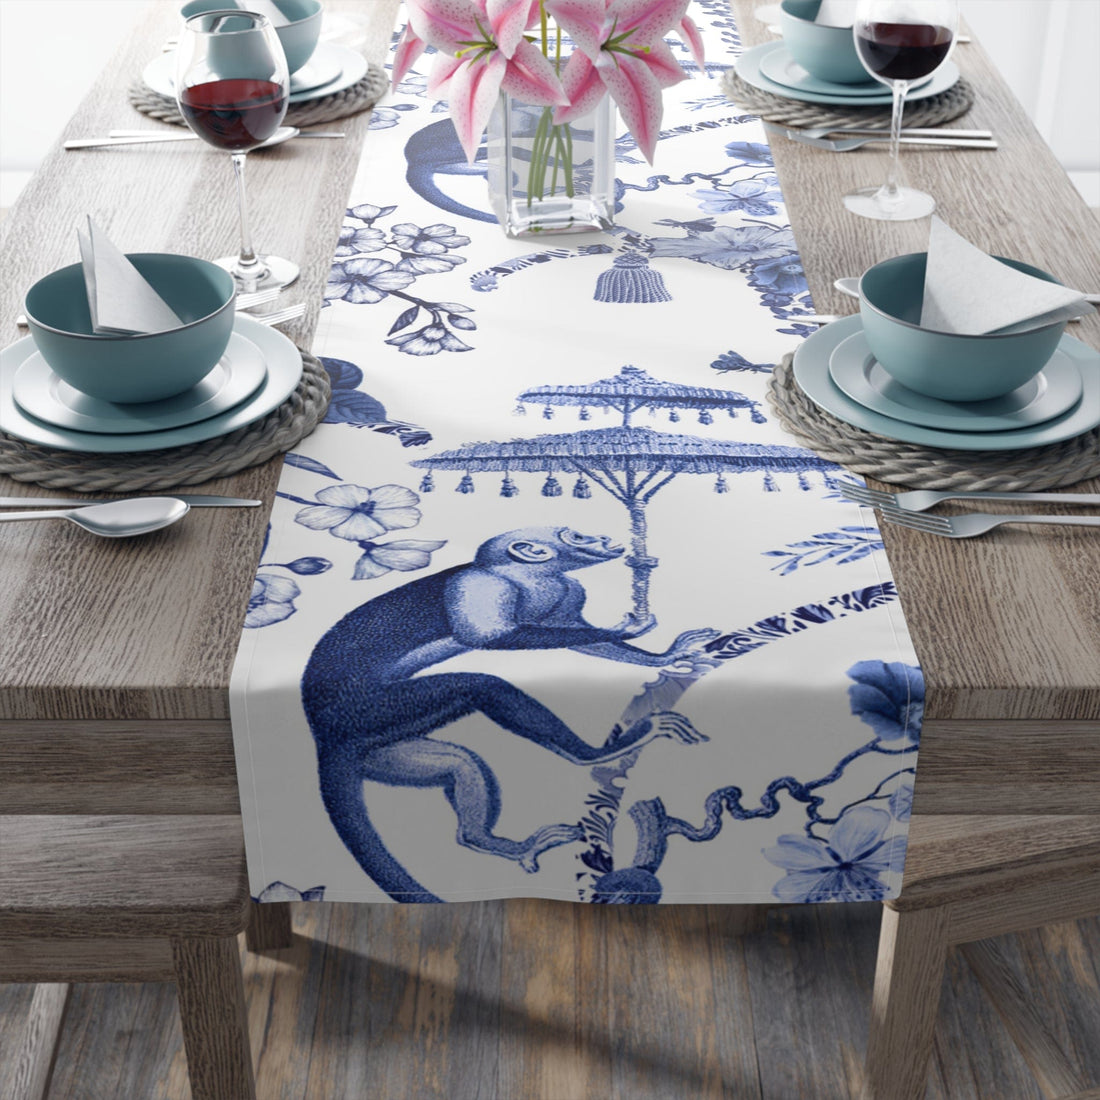 Kate McEnroe New York Chinoiserie Botanical Toile Table Runner, Floral Blue, White Chinoiserie Jungle, Country Farmhouse Grandmillenial Table DecorTable Runners79751148085223957598